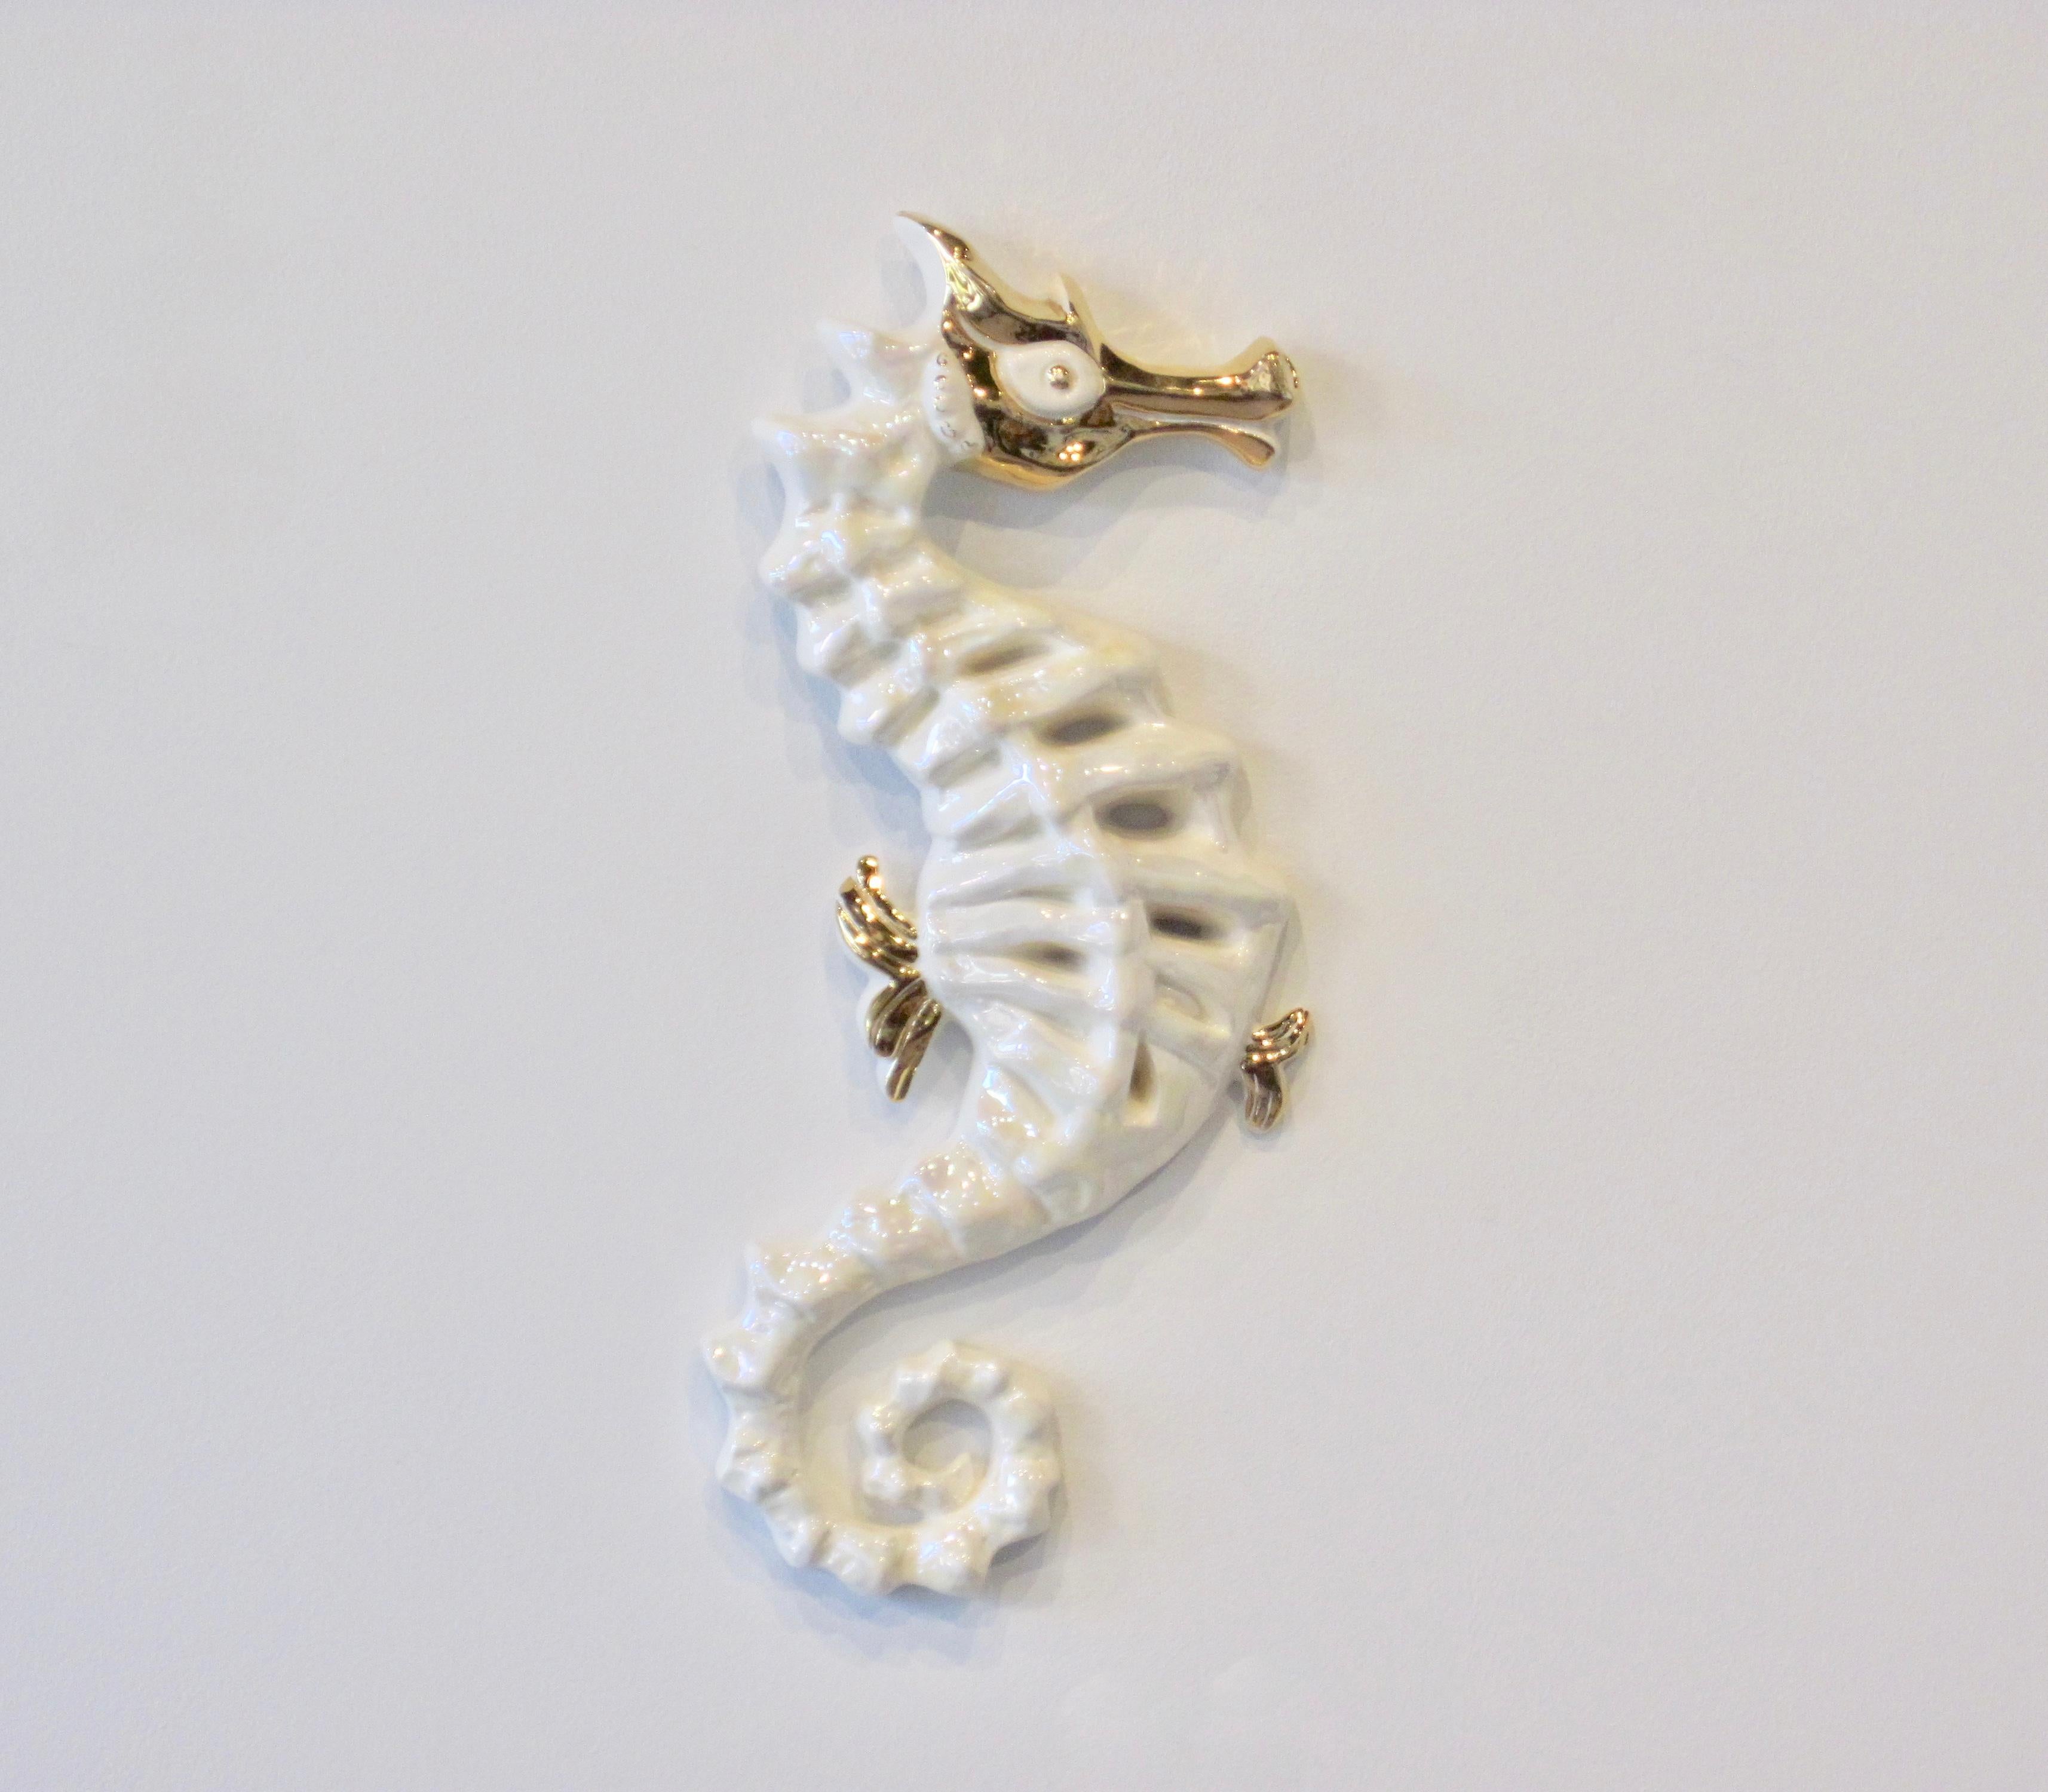 An early and rare Kay Finch(1903-1993) seahorse finely sculptured in pearlized white and gold. Hand-incised on underside.

Kay Finch Ceramics were made in Corona Del Mar, California, from 1935 to 1963. All her pieces were handmade and composed of